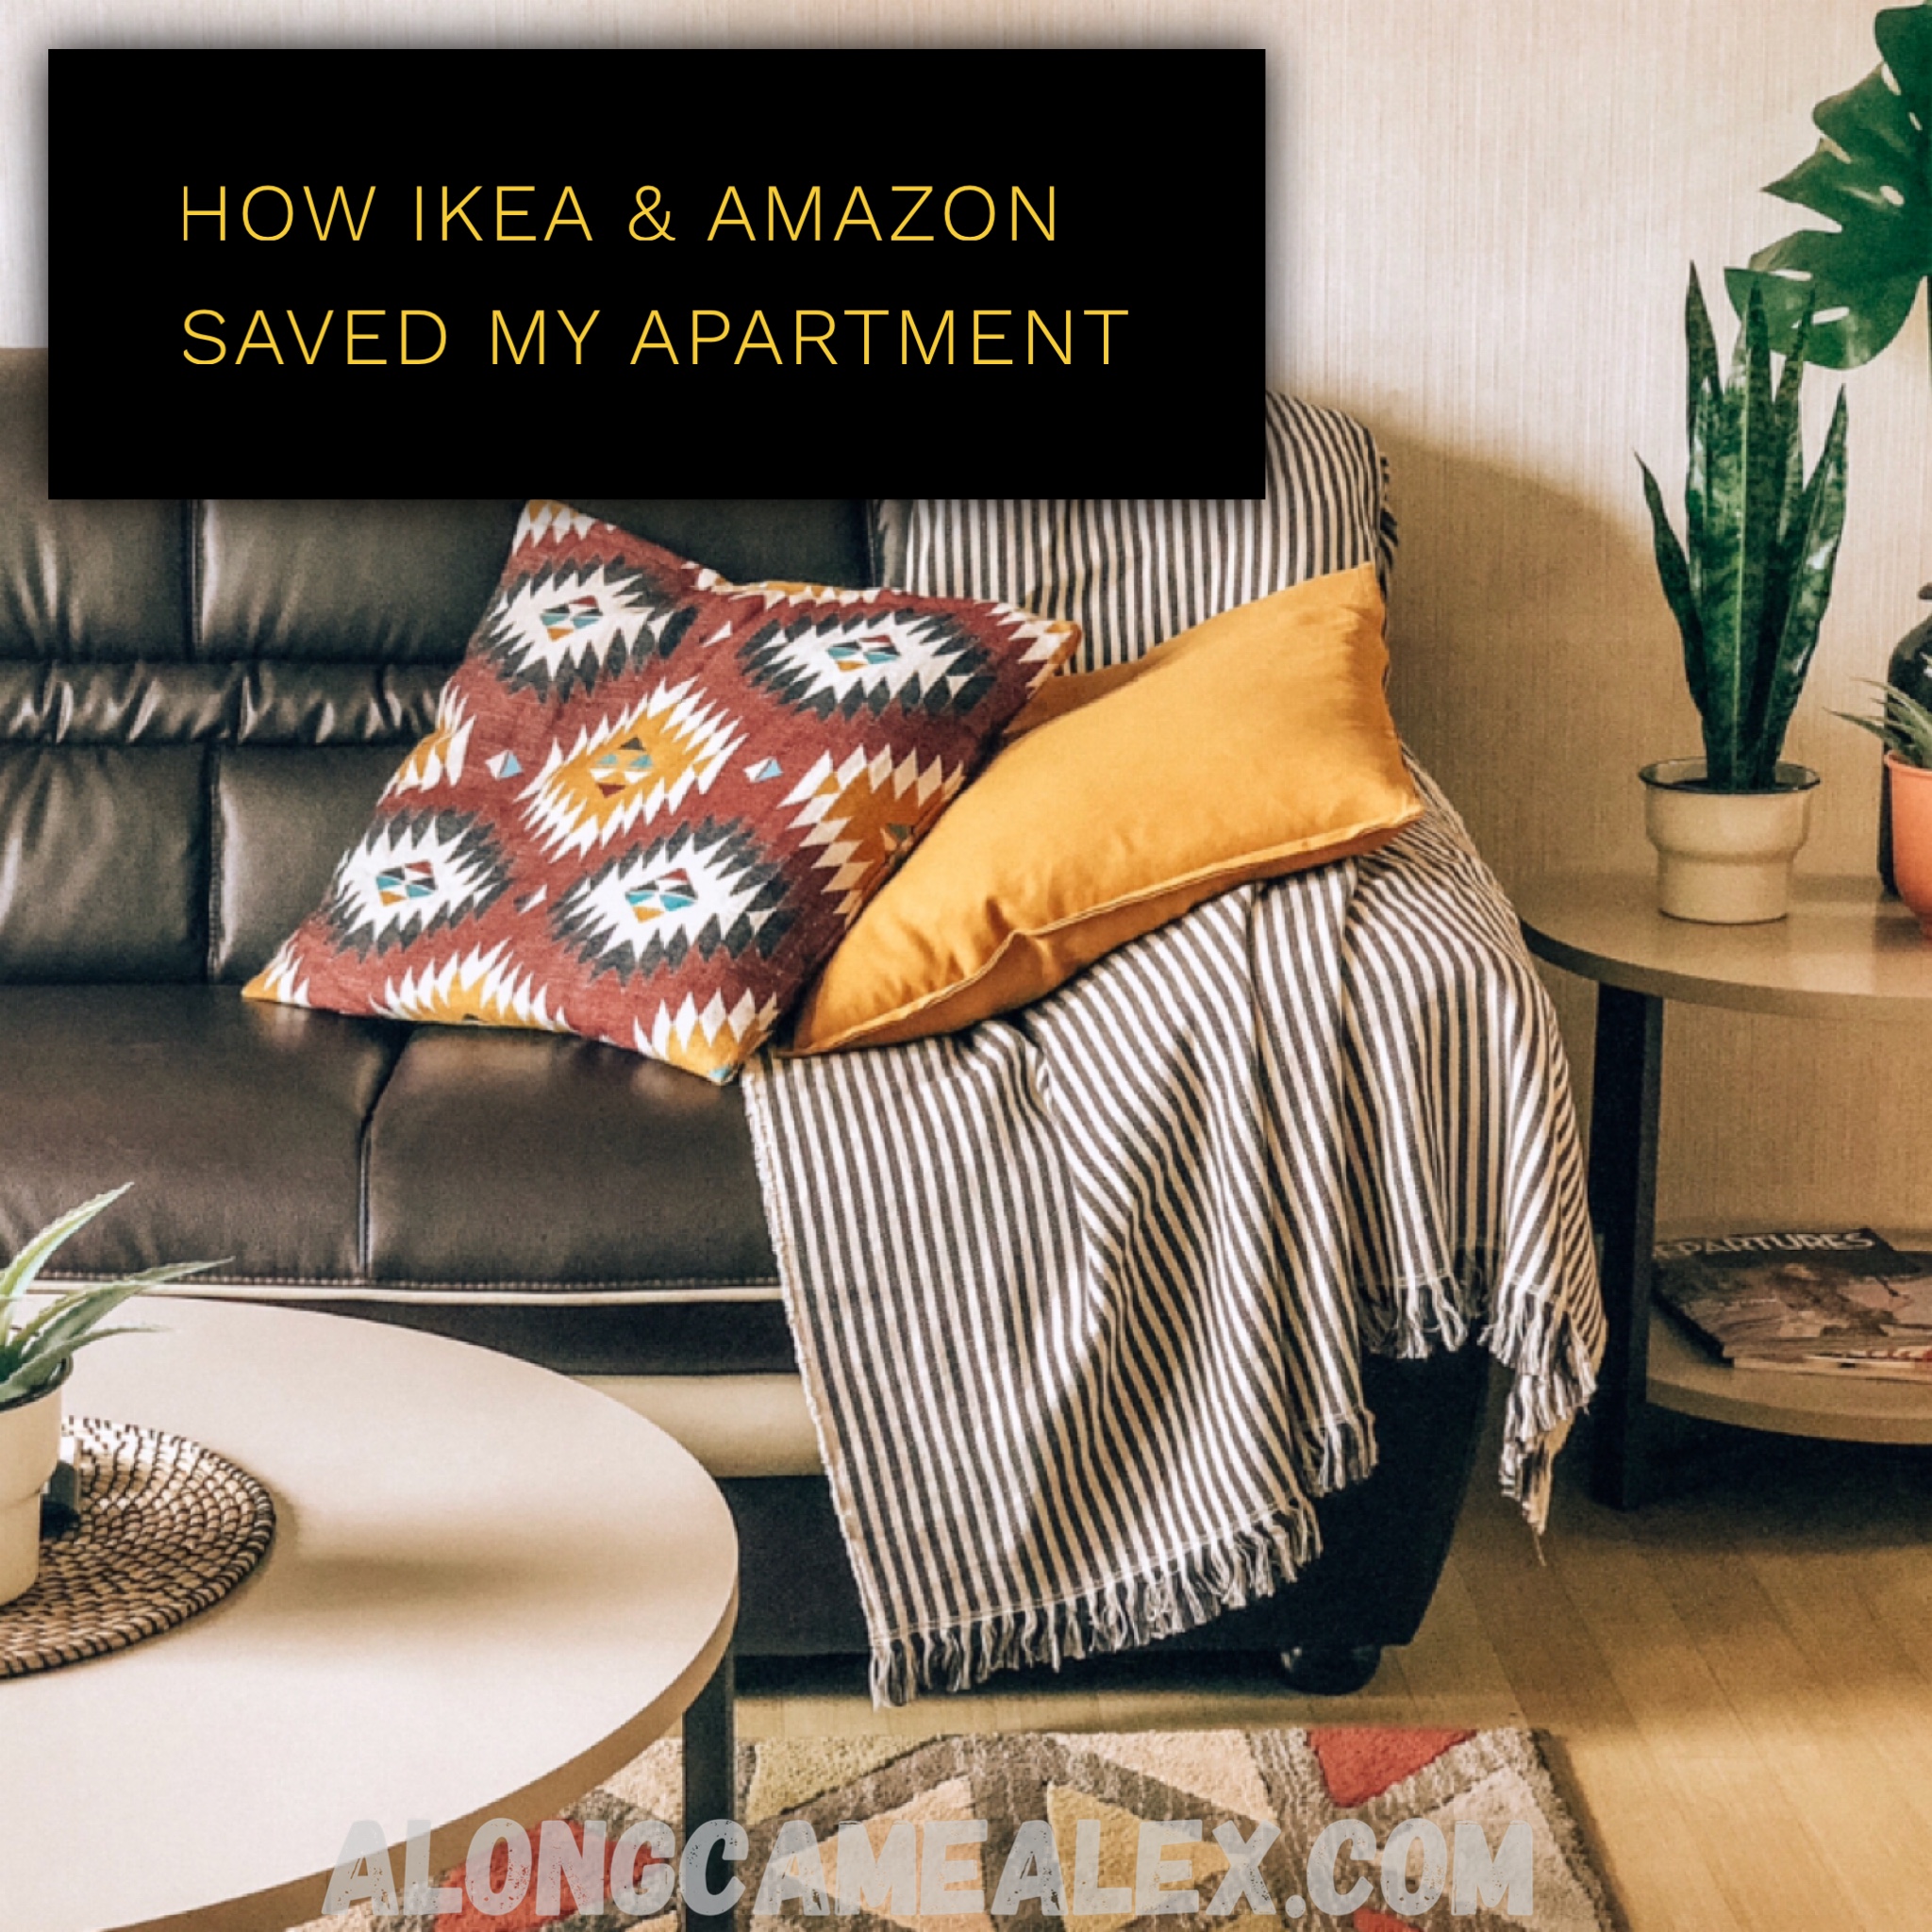 How I saved my Apartment with IKEA & Amazon